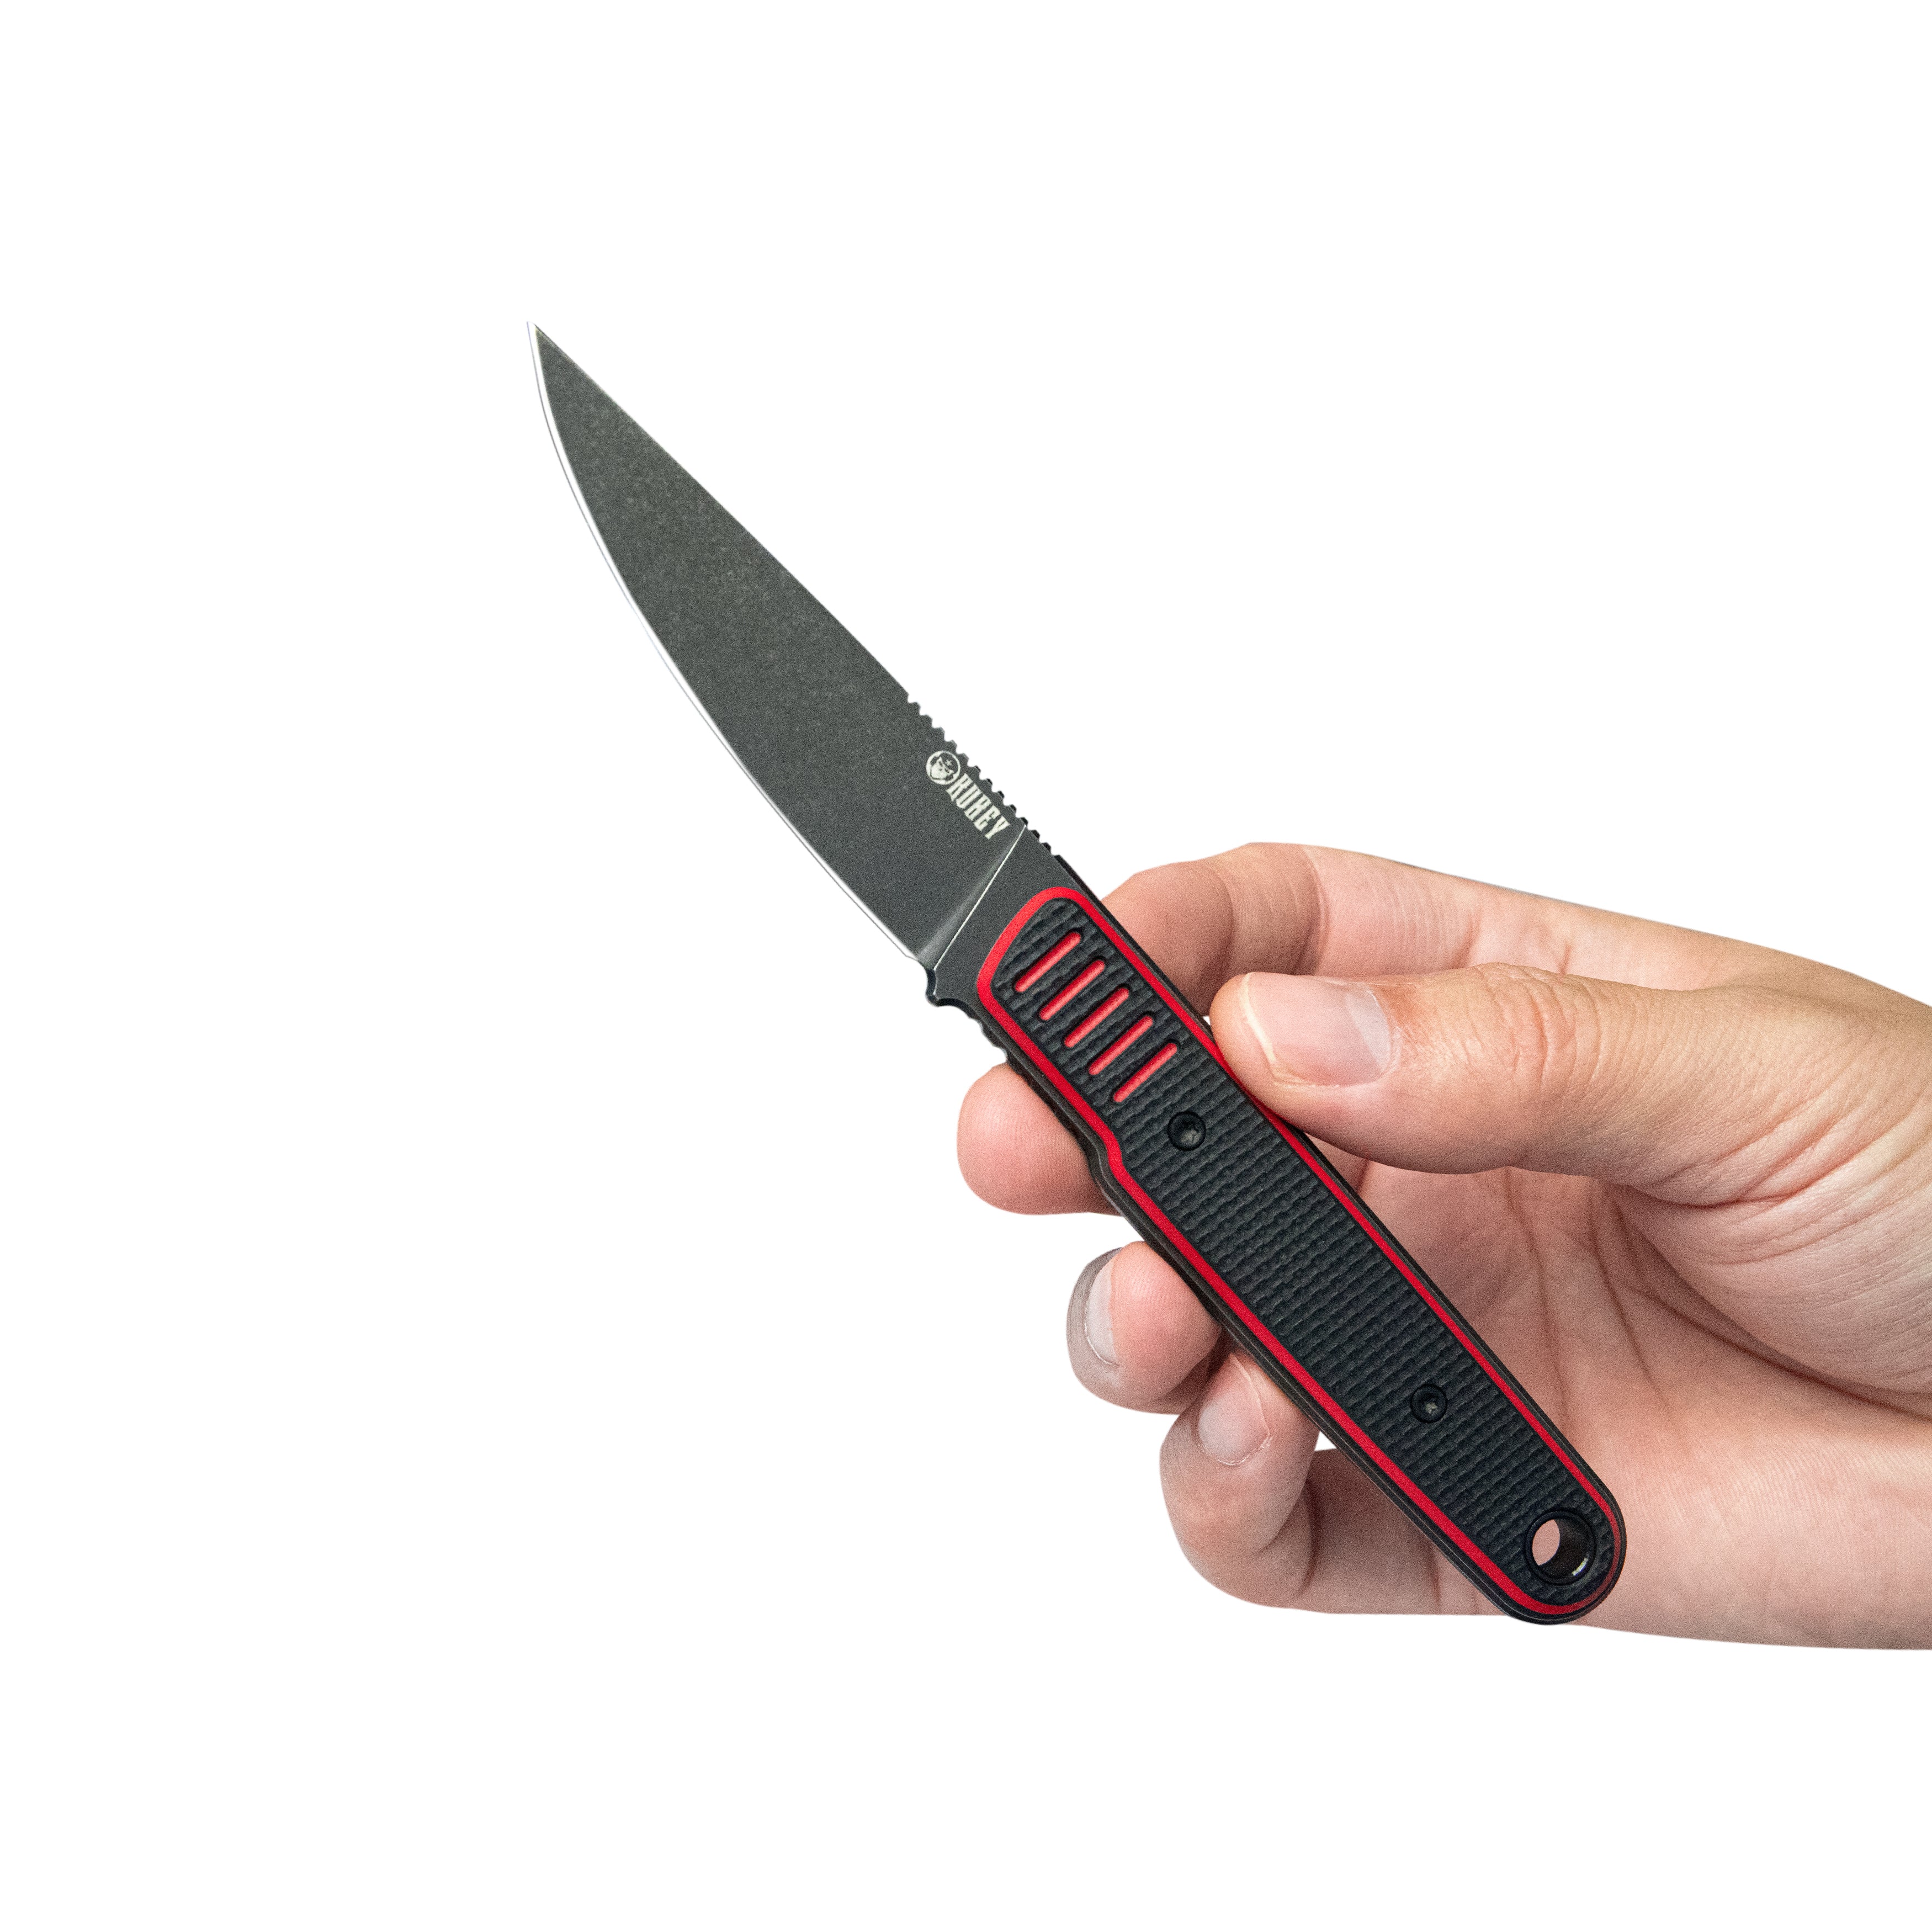 Kubey JL Drop Point Fixie Every Day Carry Fixed Blade Knife Red Black G-10 3.11'' Drop Point Blackwash 14C28N KU356A